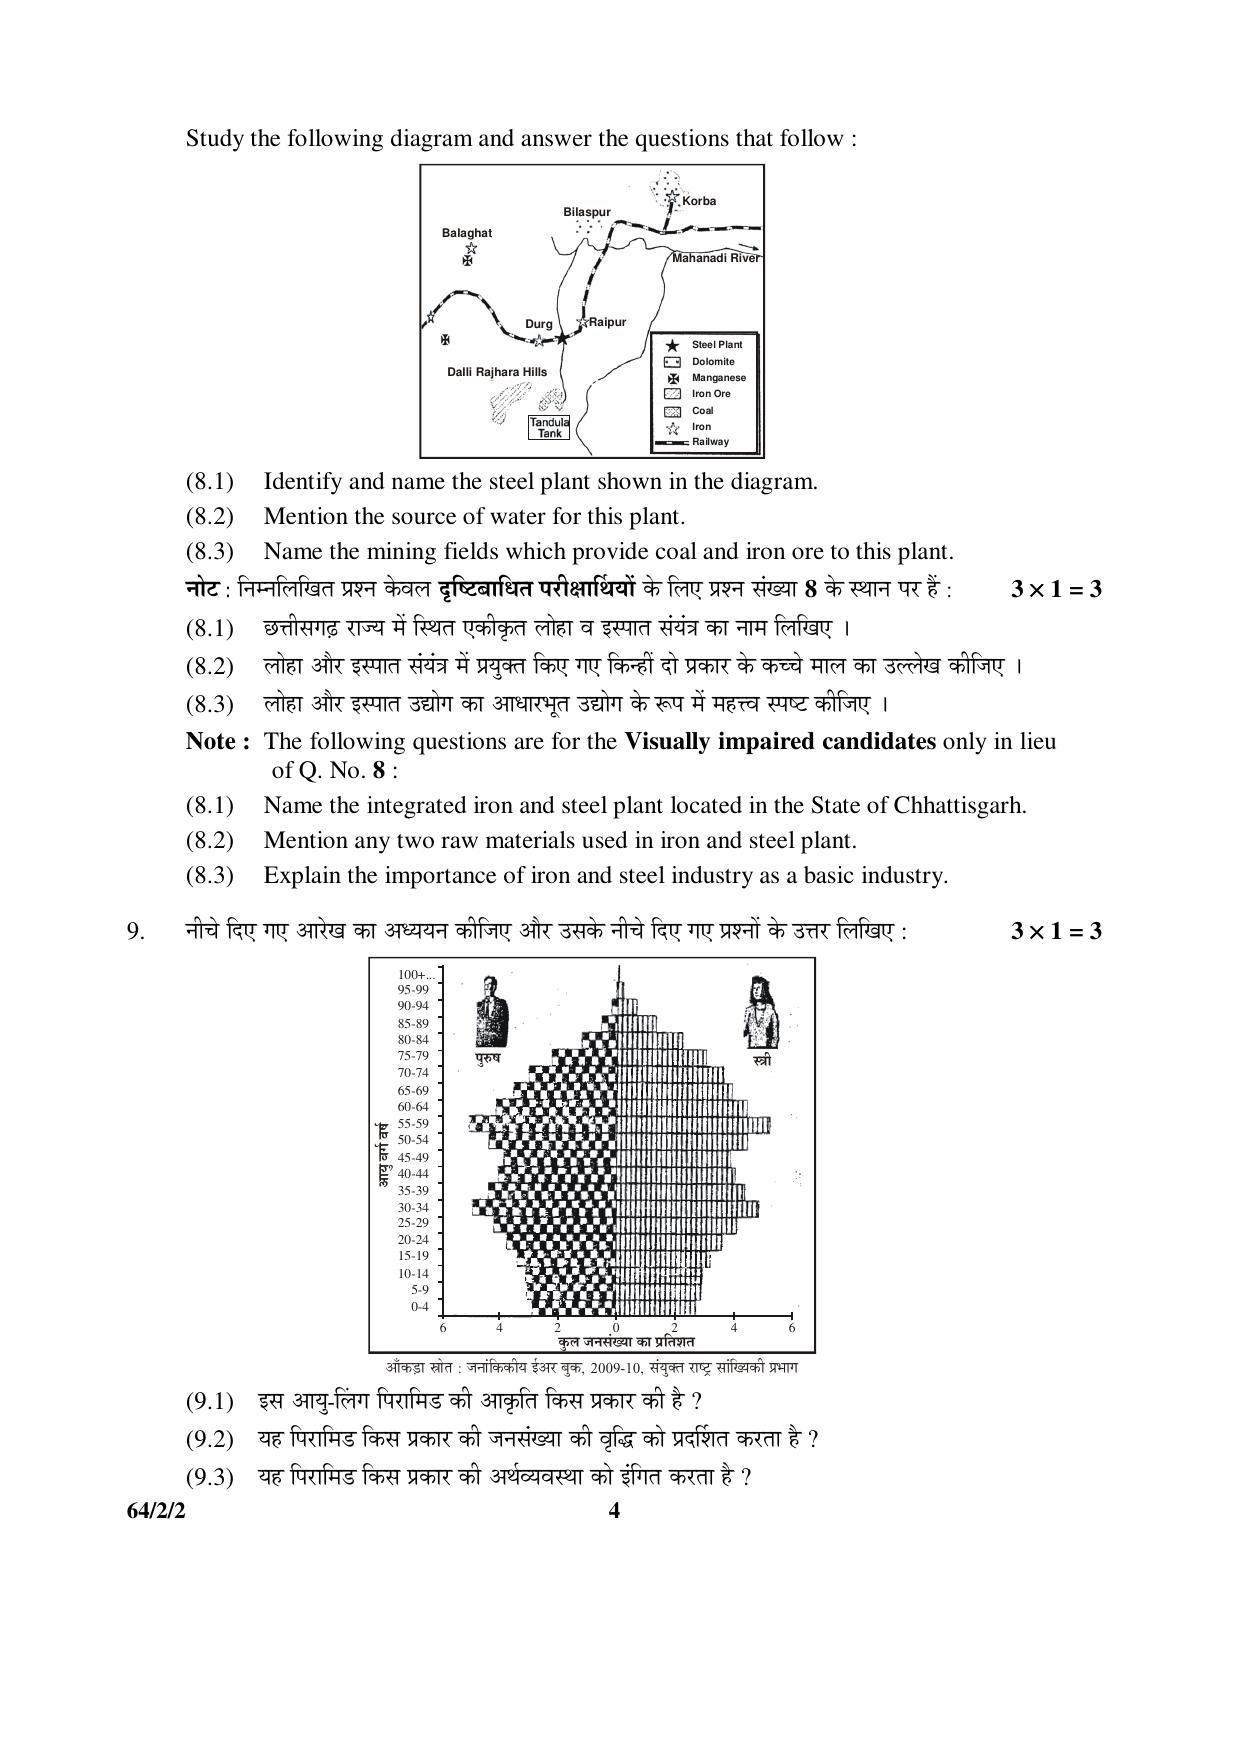 CBSE Class 12 64-2-2 Geography 2016 Question Paper - Page 4